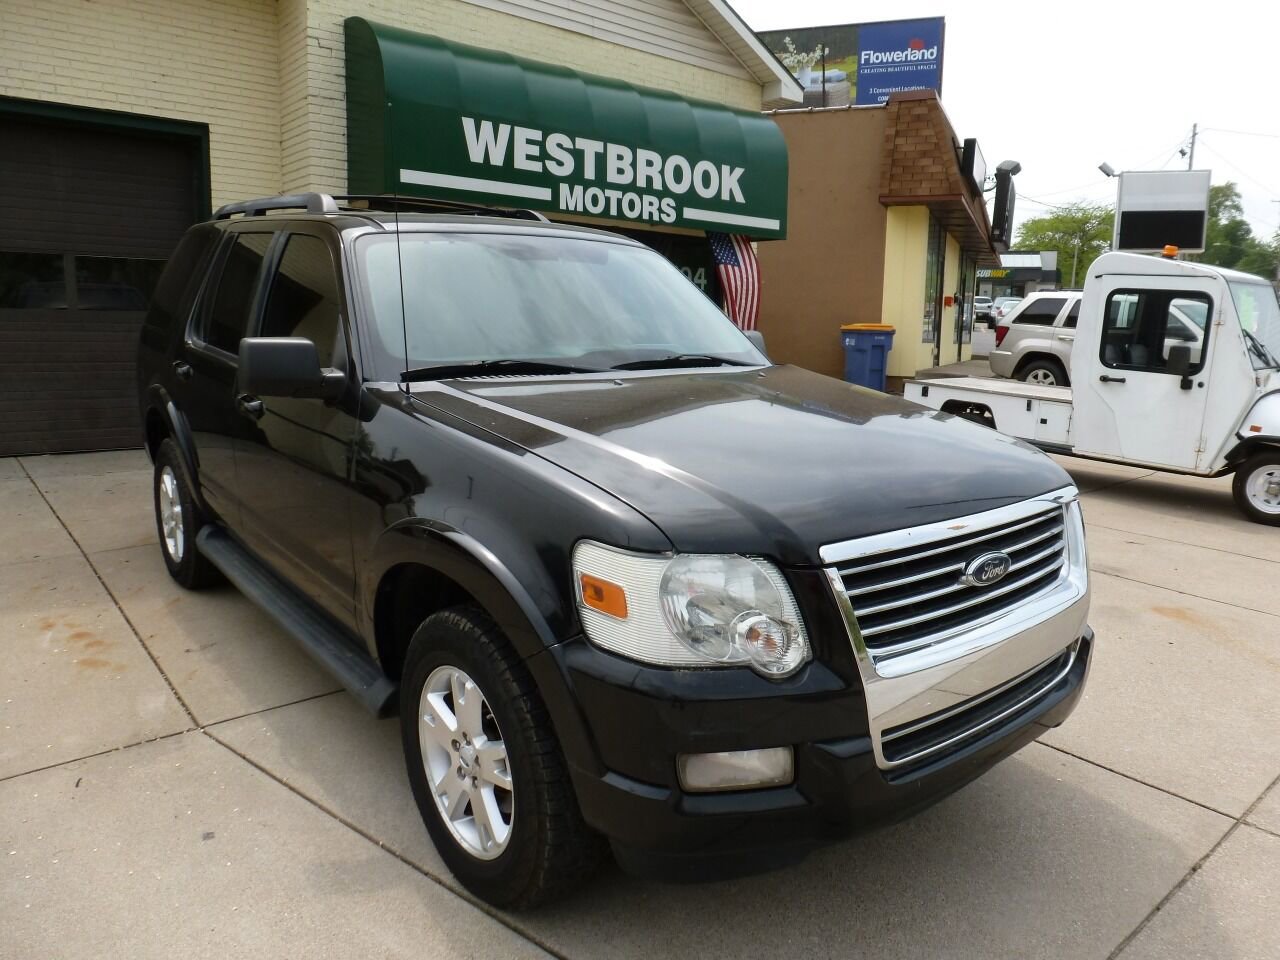 Used 2009 Ford Explorer for Sale in Holland, MI (Test Drive at Home) -  Kelley Blue Book